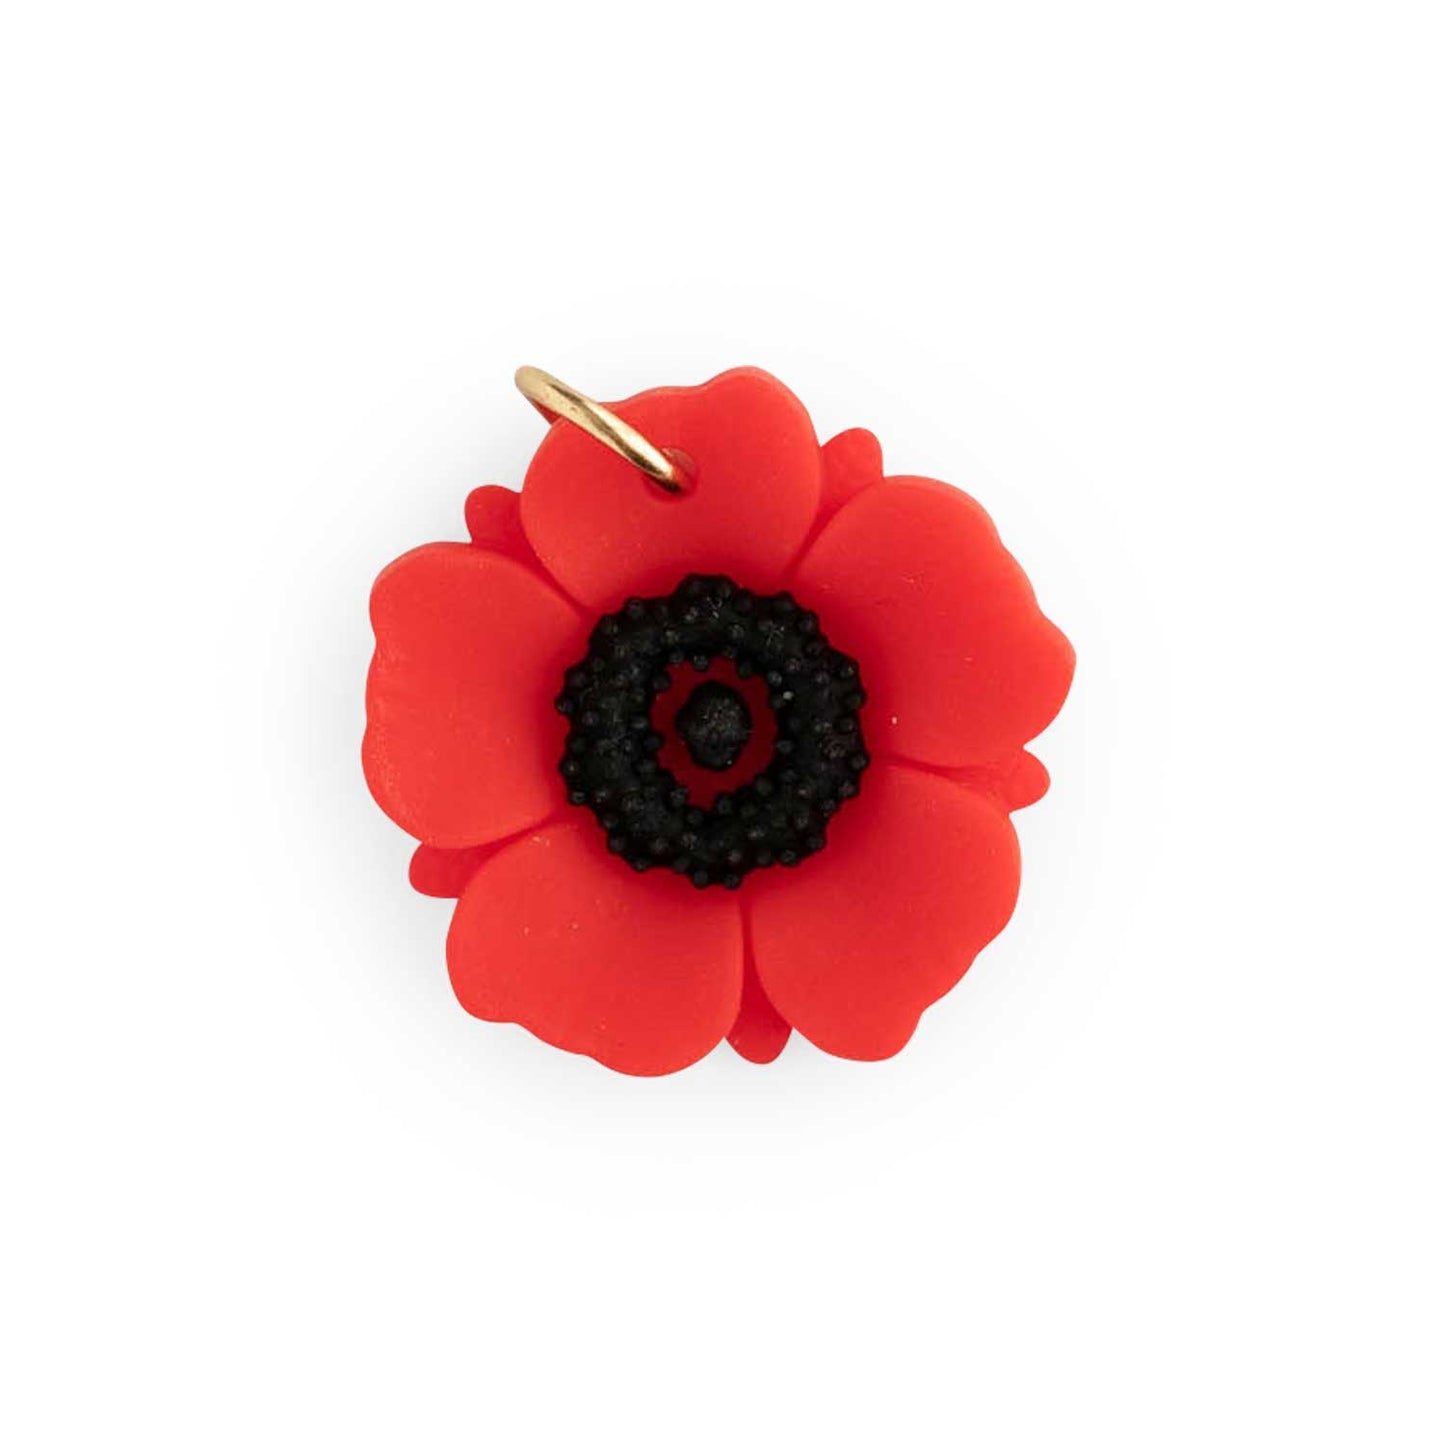 Silicone Charms Poppies Bright Red from Cara & Co Craft Supply